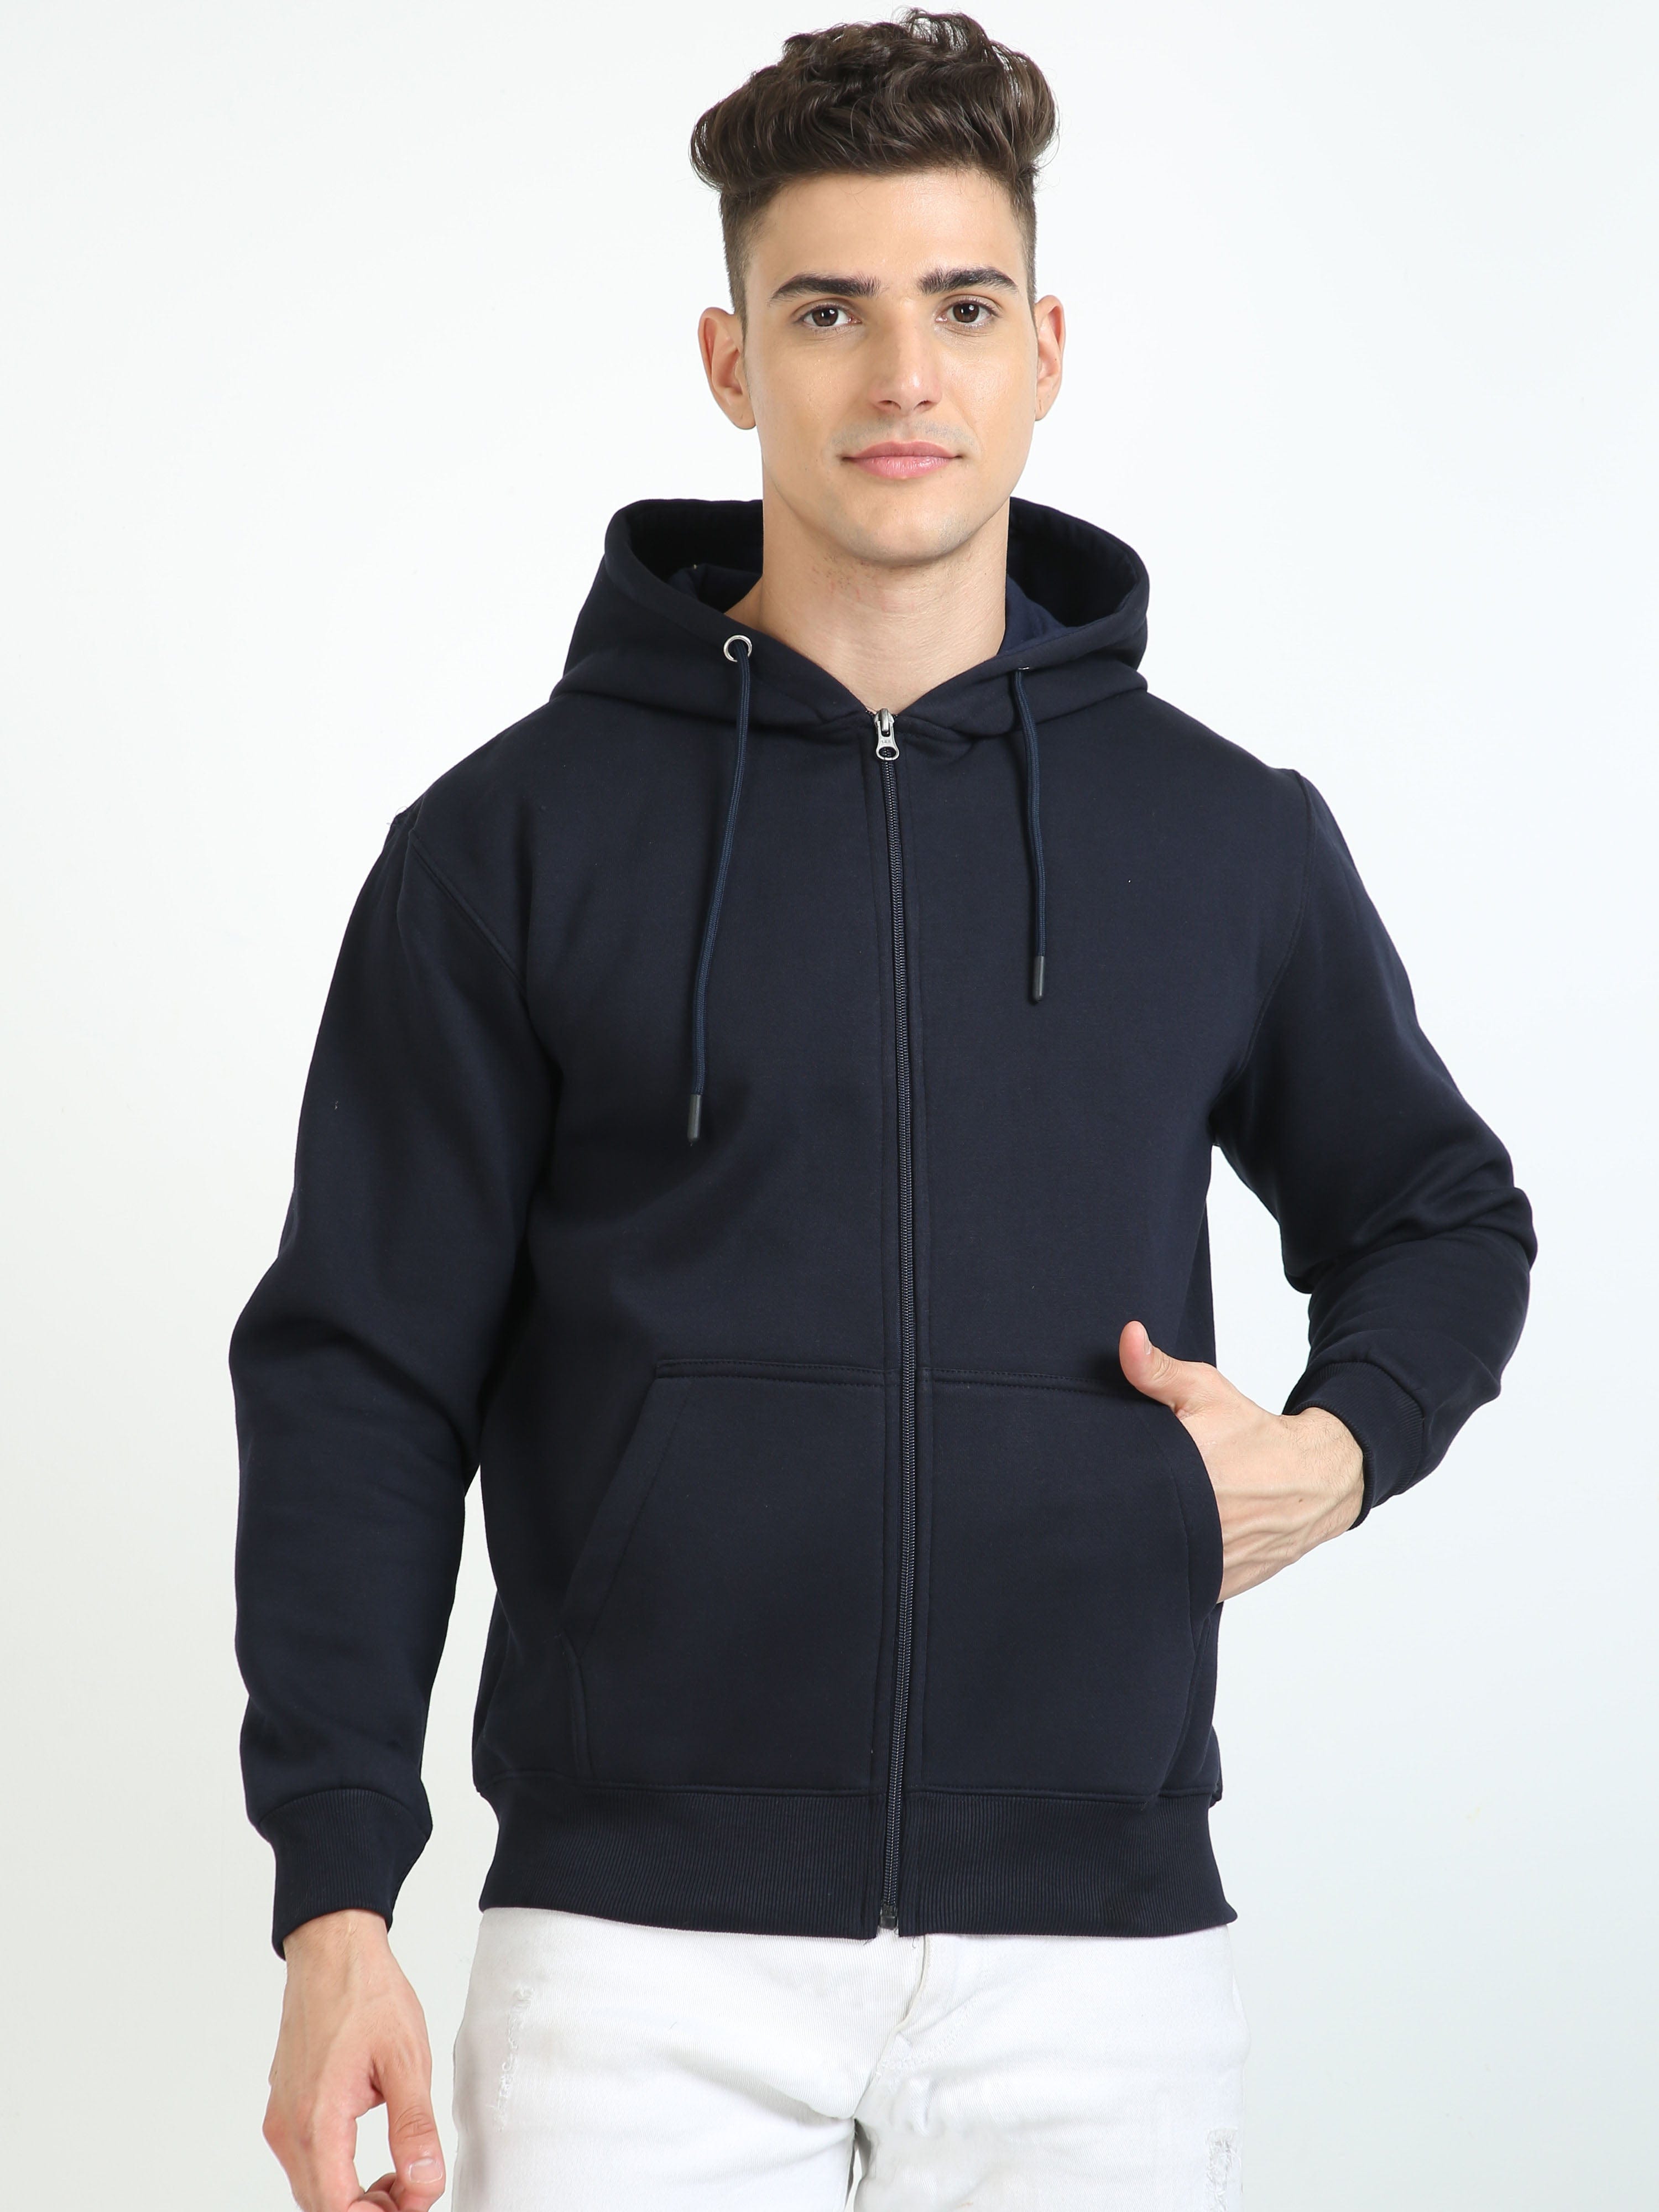 Body Armour Canada Bullet & Cut Resistant Products - Cut, Slash and Bite  Resistant Zipped Hoodie